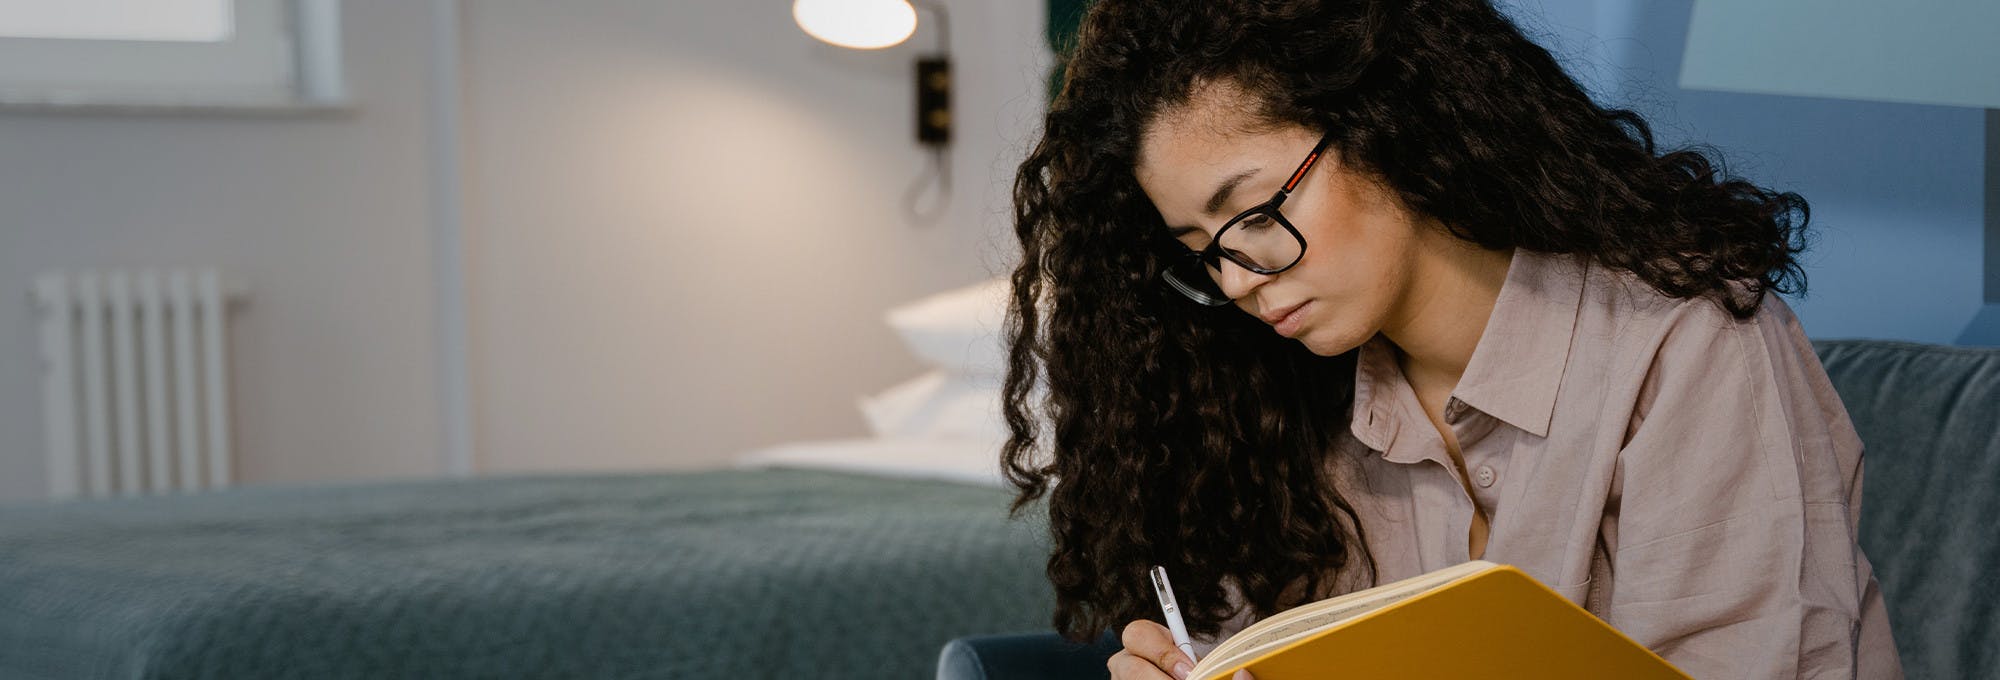 Woman with glasses on writing in a notebook reflecting on which college major to choose